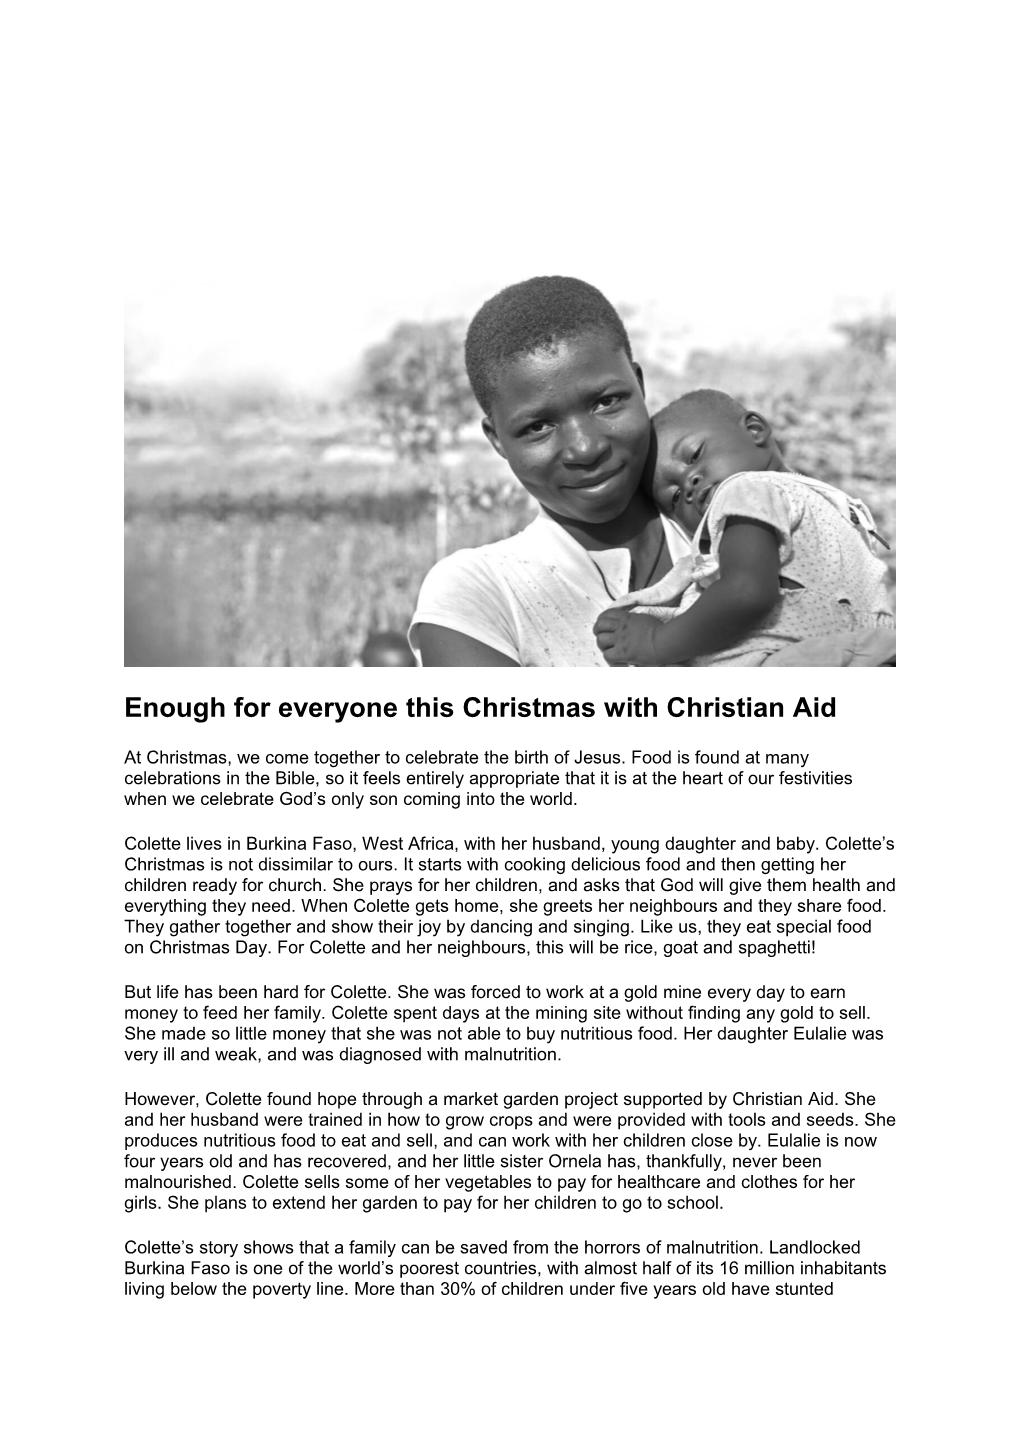 Enough for Everyone This Christmas with Christian Aid